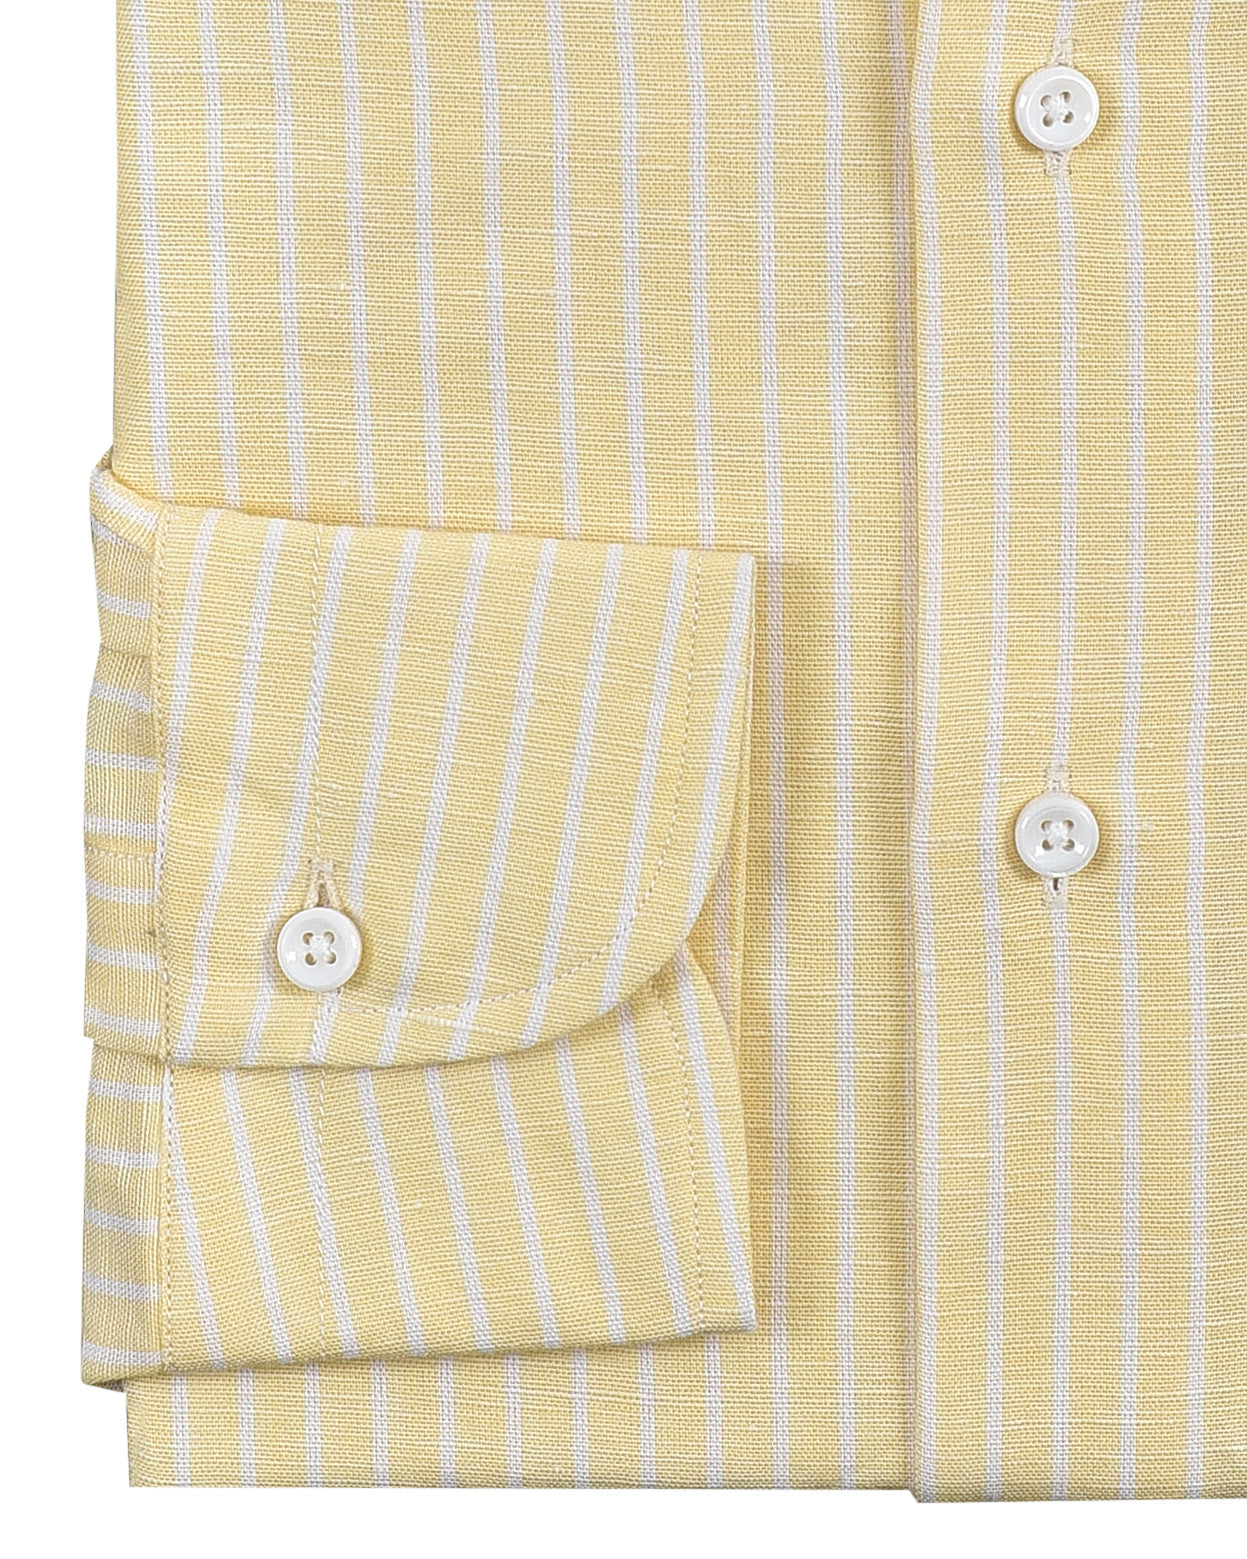 Cuff of the custom linen shirt for men in pastel yellow with white stripes by Luxire Clothing